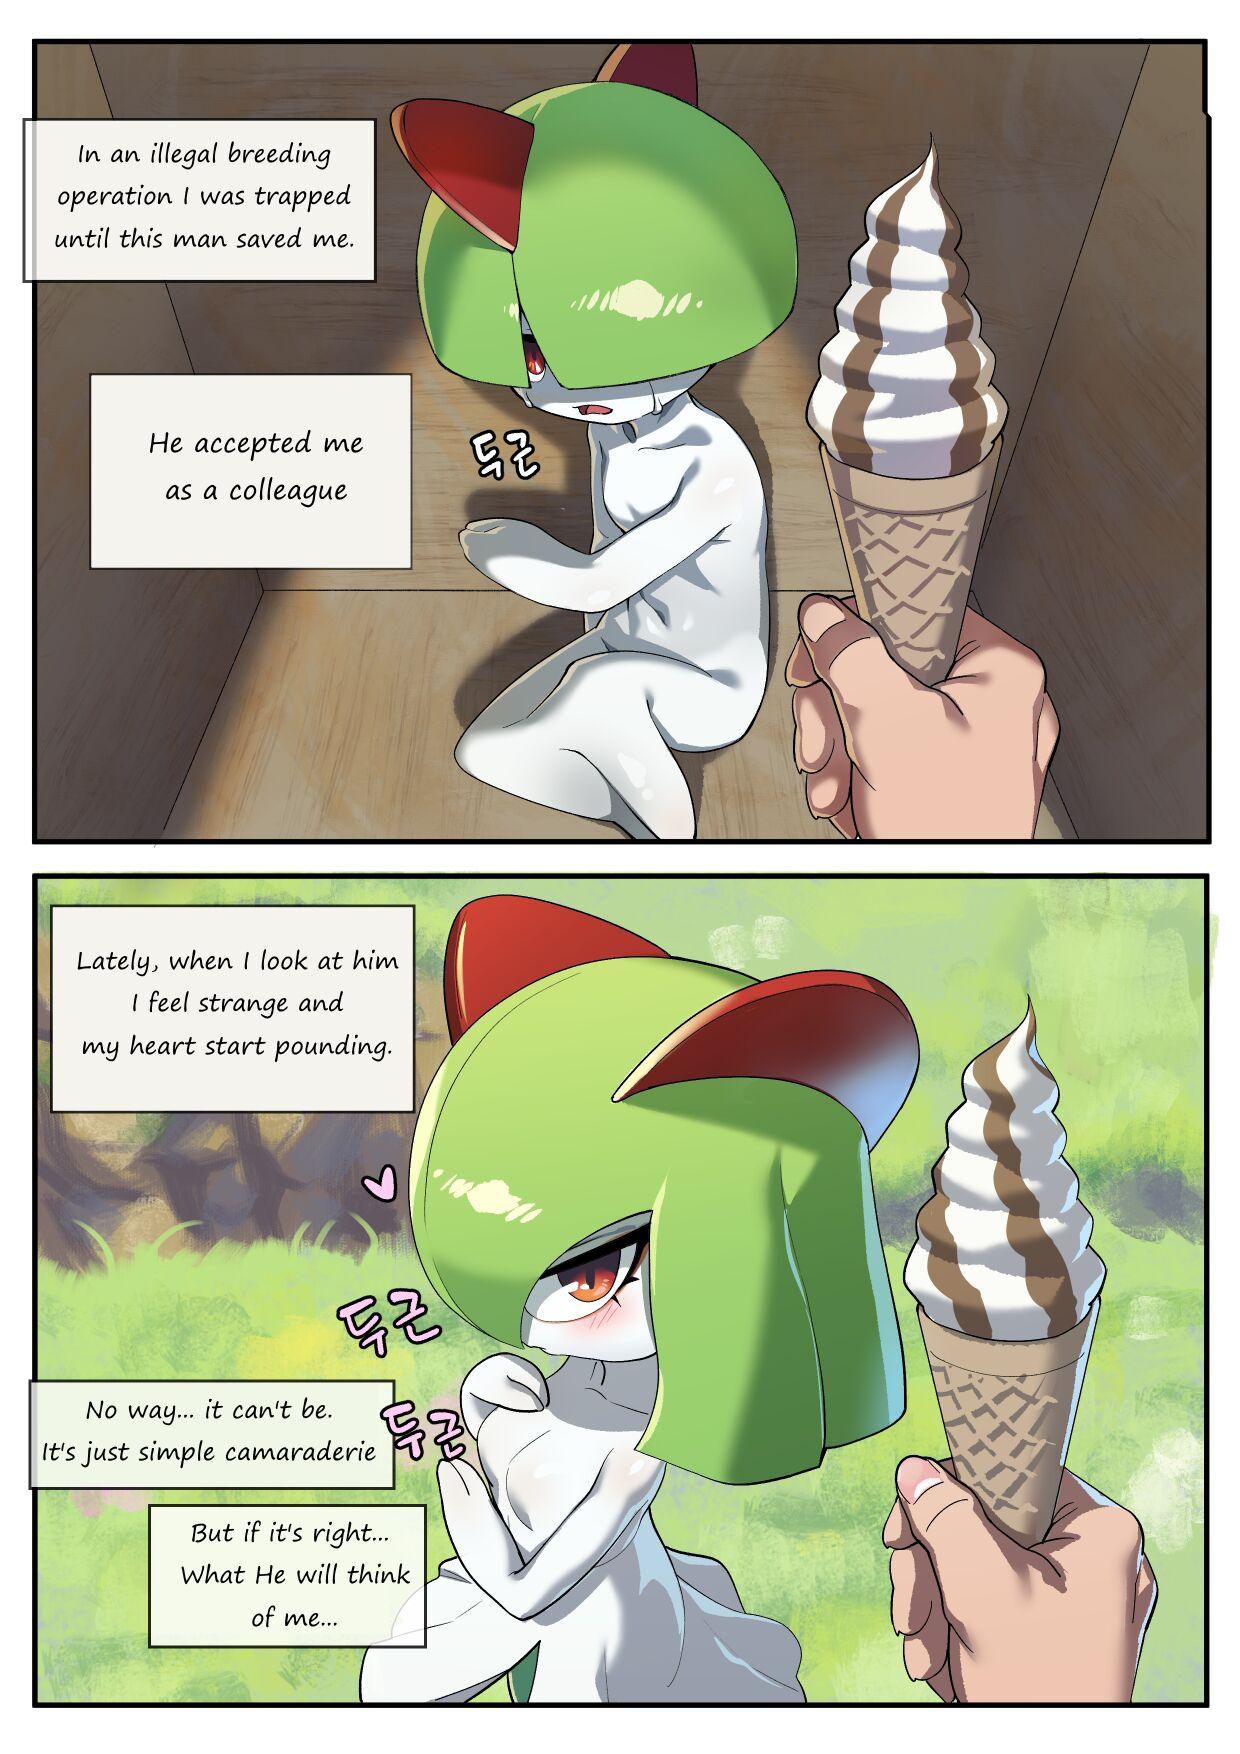 Vaginal The Gardevior that loved her trainer too much - Pokemon | pocket monsters Sofa - Page 1